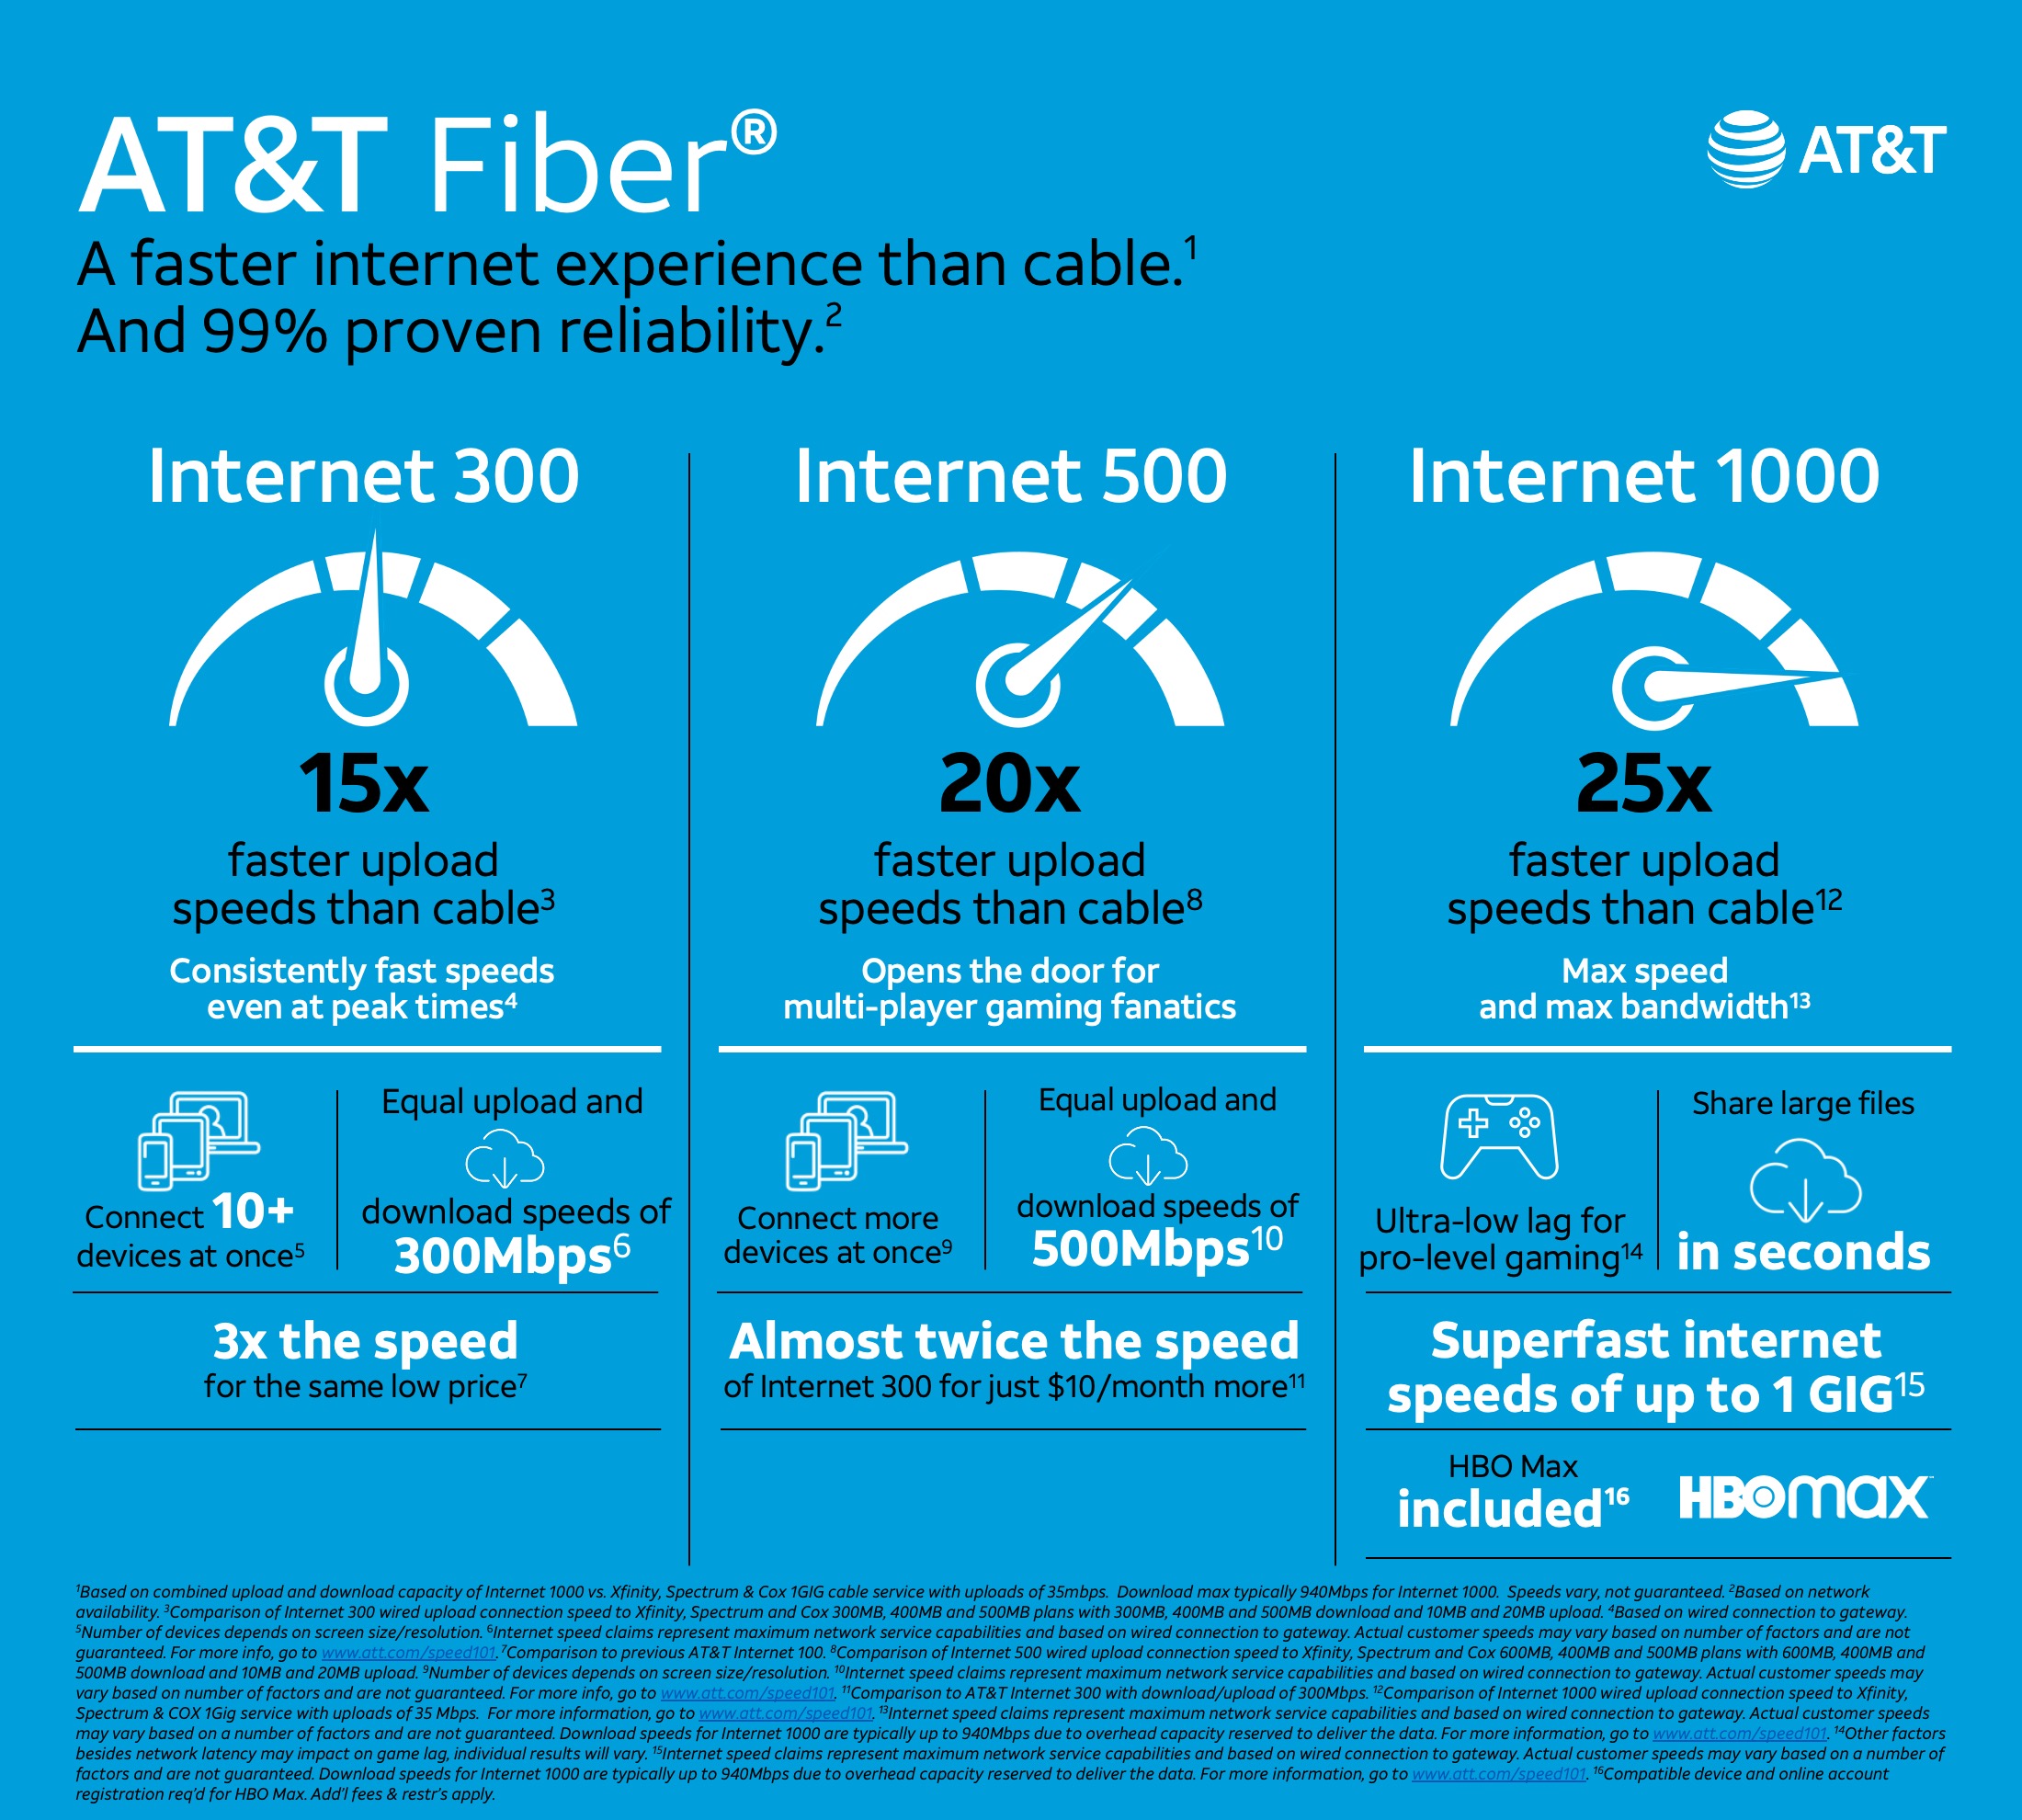 AT&T Fiber Increases Internet Speed and Security Features for Customers